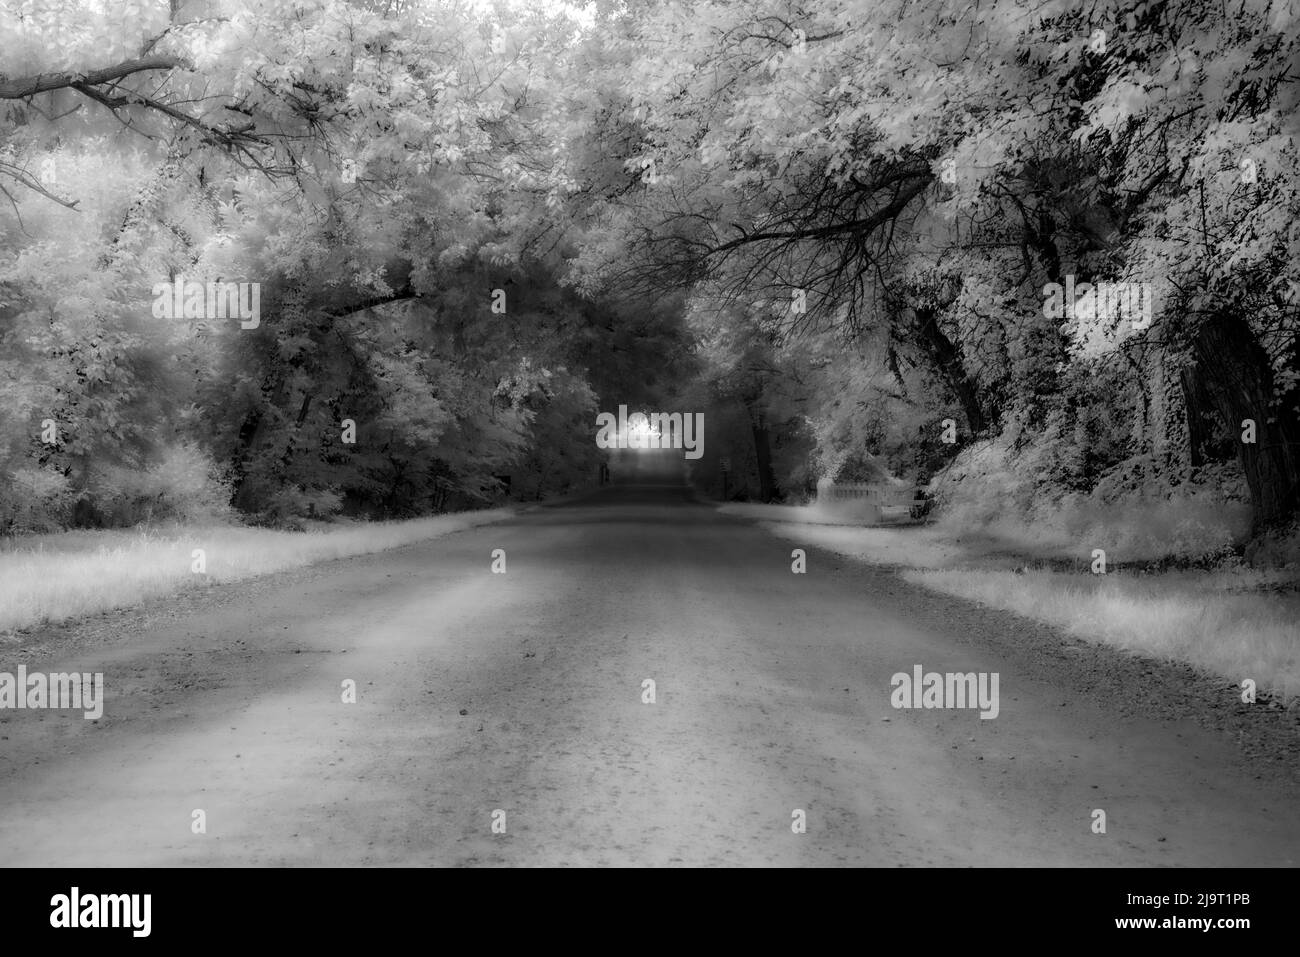 Old road disappearing through tree tunnel Stock Photo